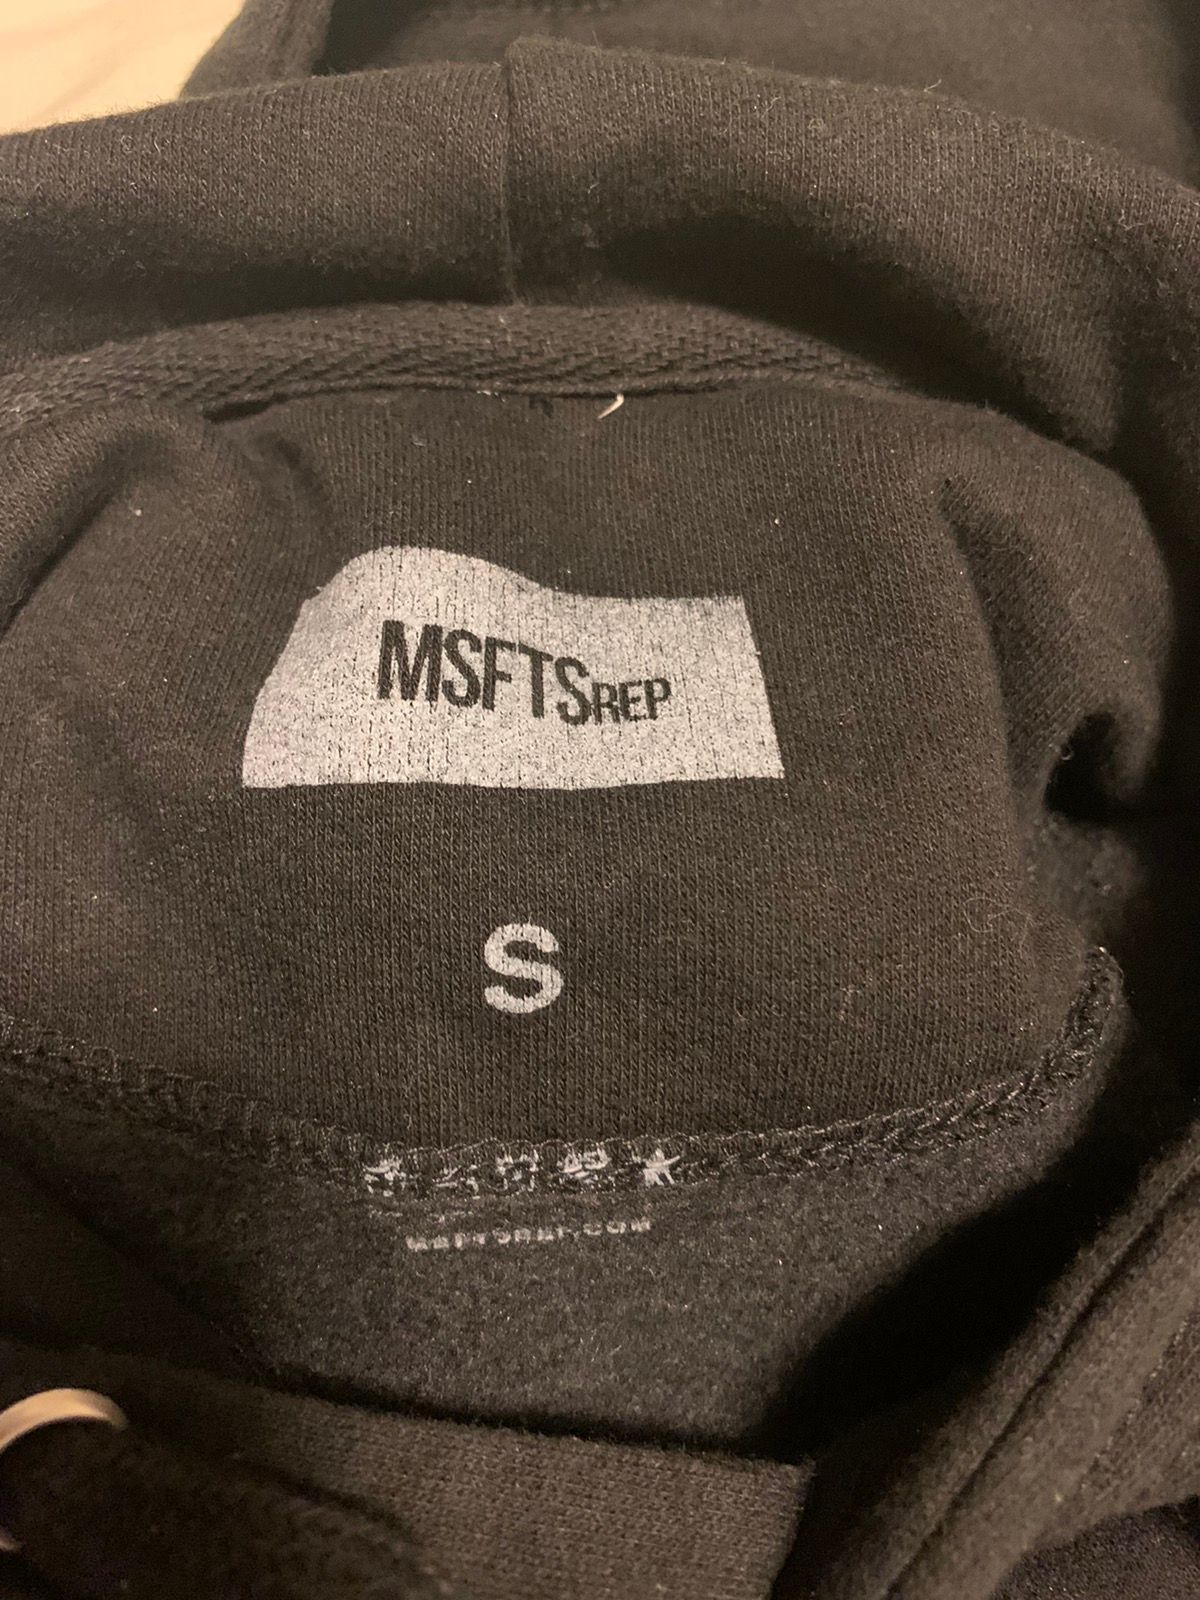 Msftsrep Jaden Smith MSFTsrep Syre Tour Hoodie Size US S / EU 44-46 / 1 - 4 Preview